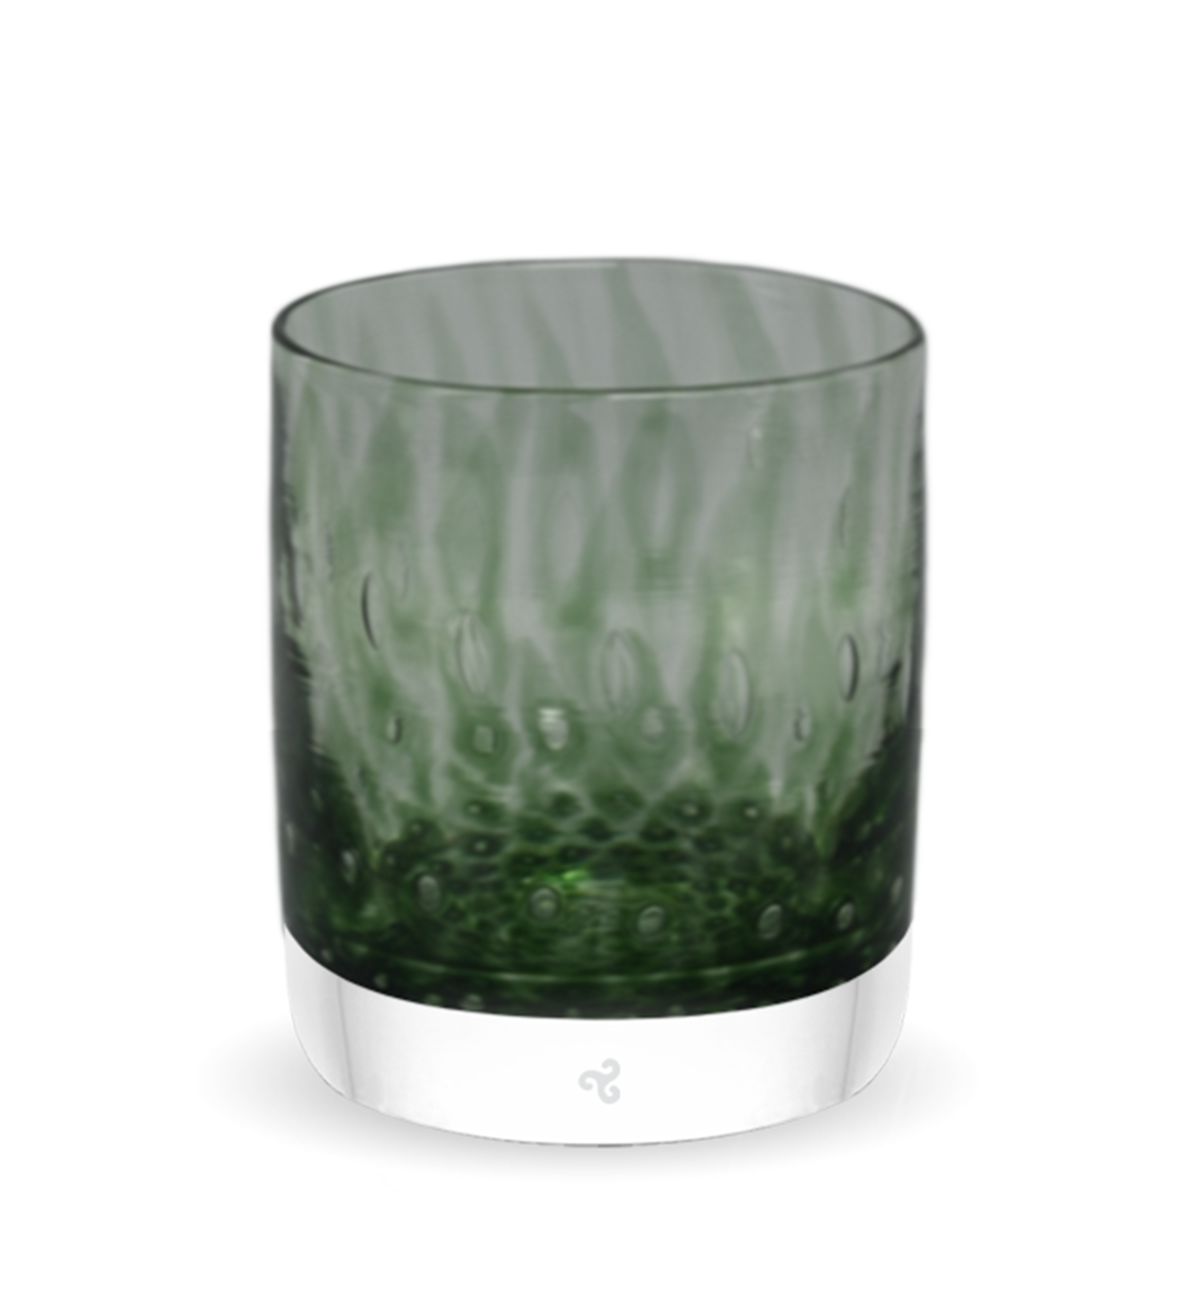 infusion rocker is a dark green hand-blown low ball glass with a bubble pattern.